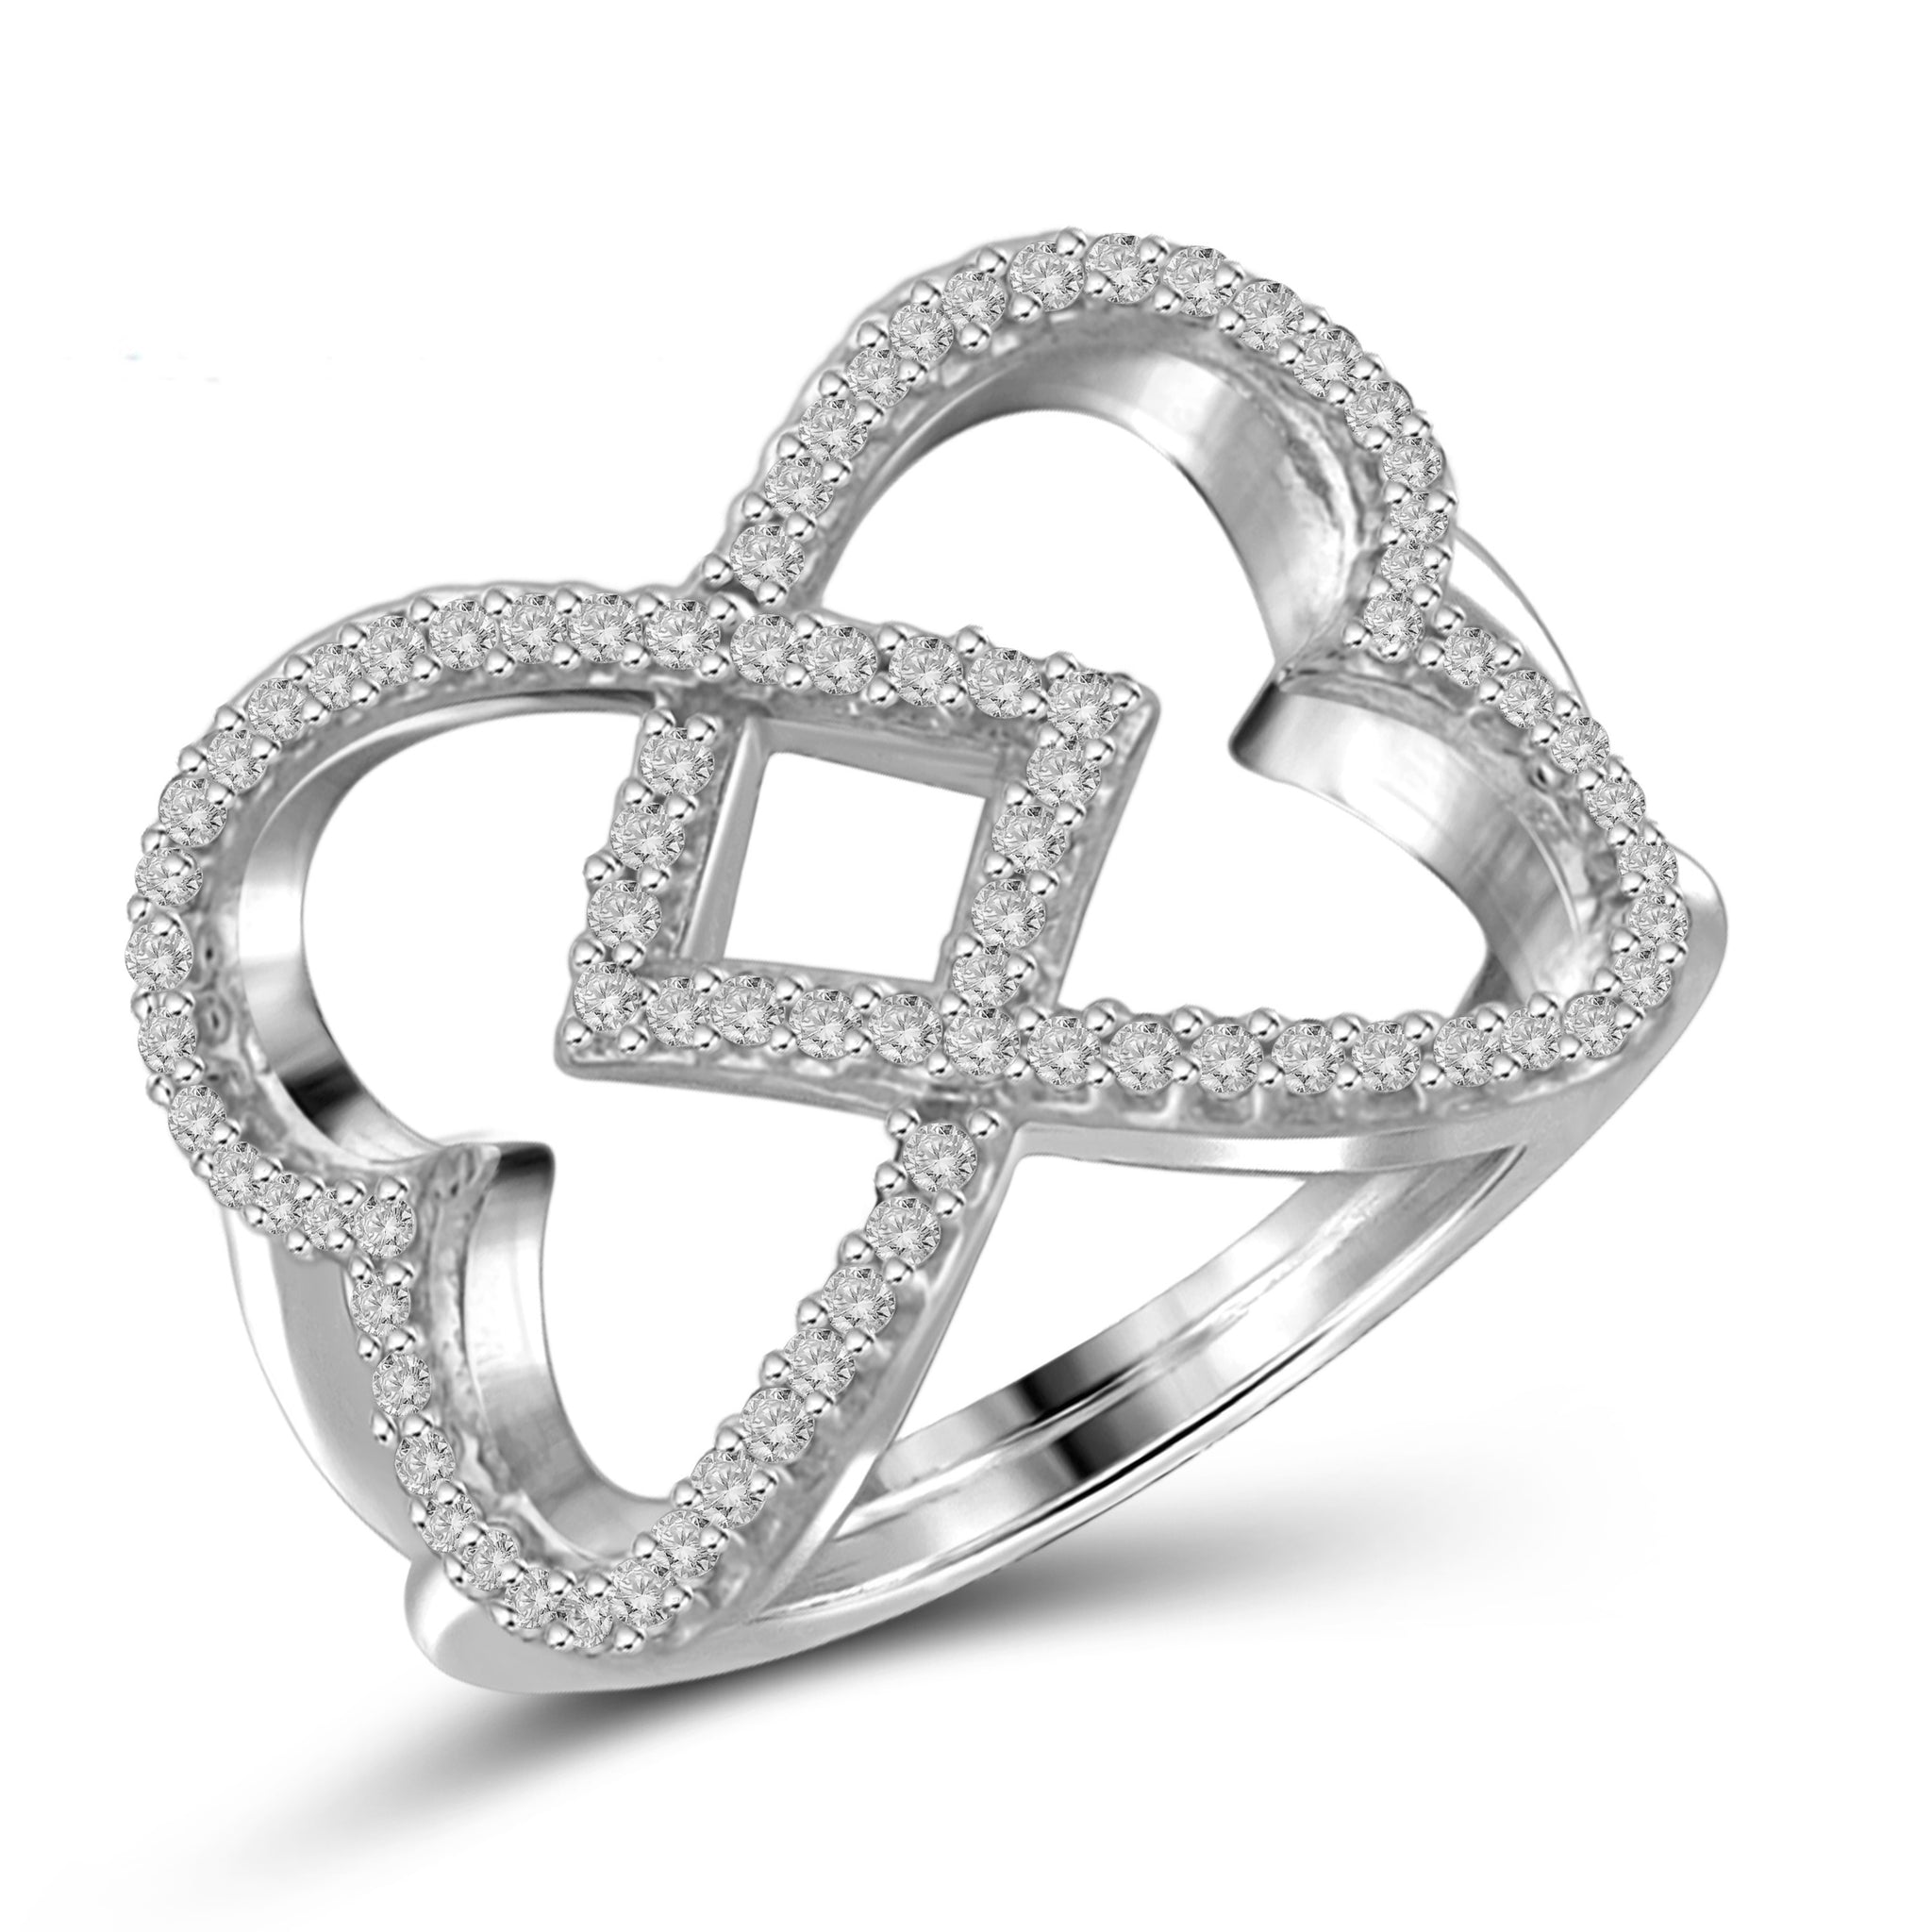 JewelonFire 1/4 Carat T.W. White Diamond Sterling Silver Heart Ring - Assorted Colors